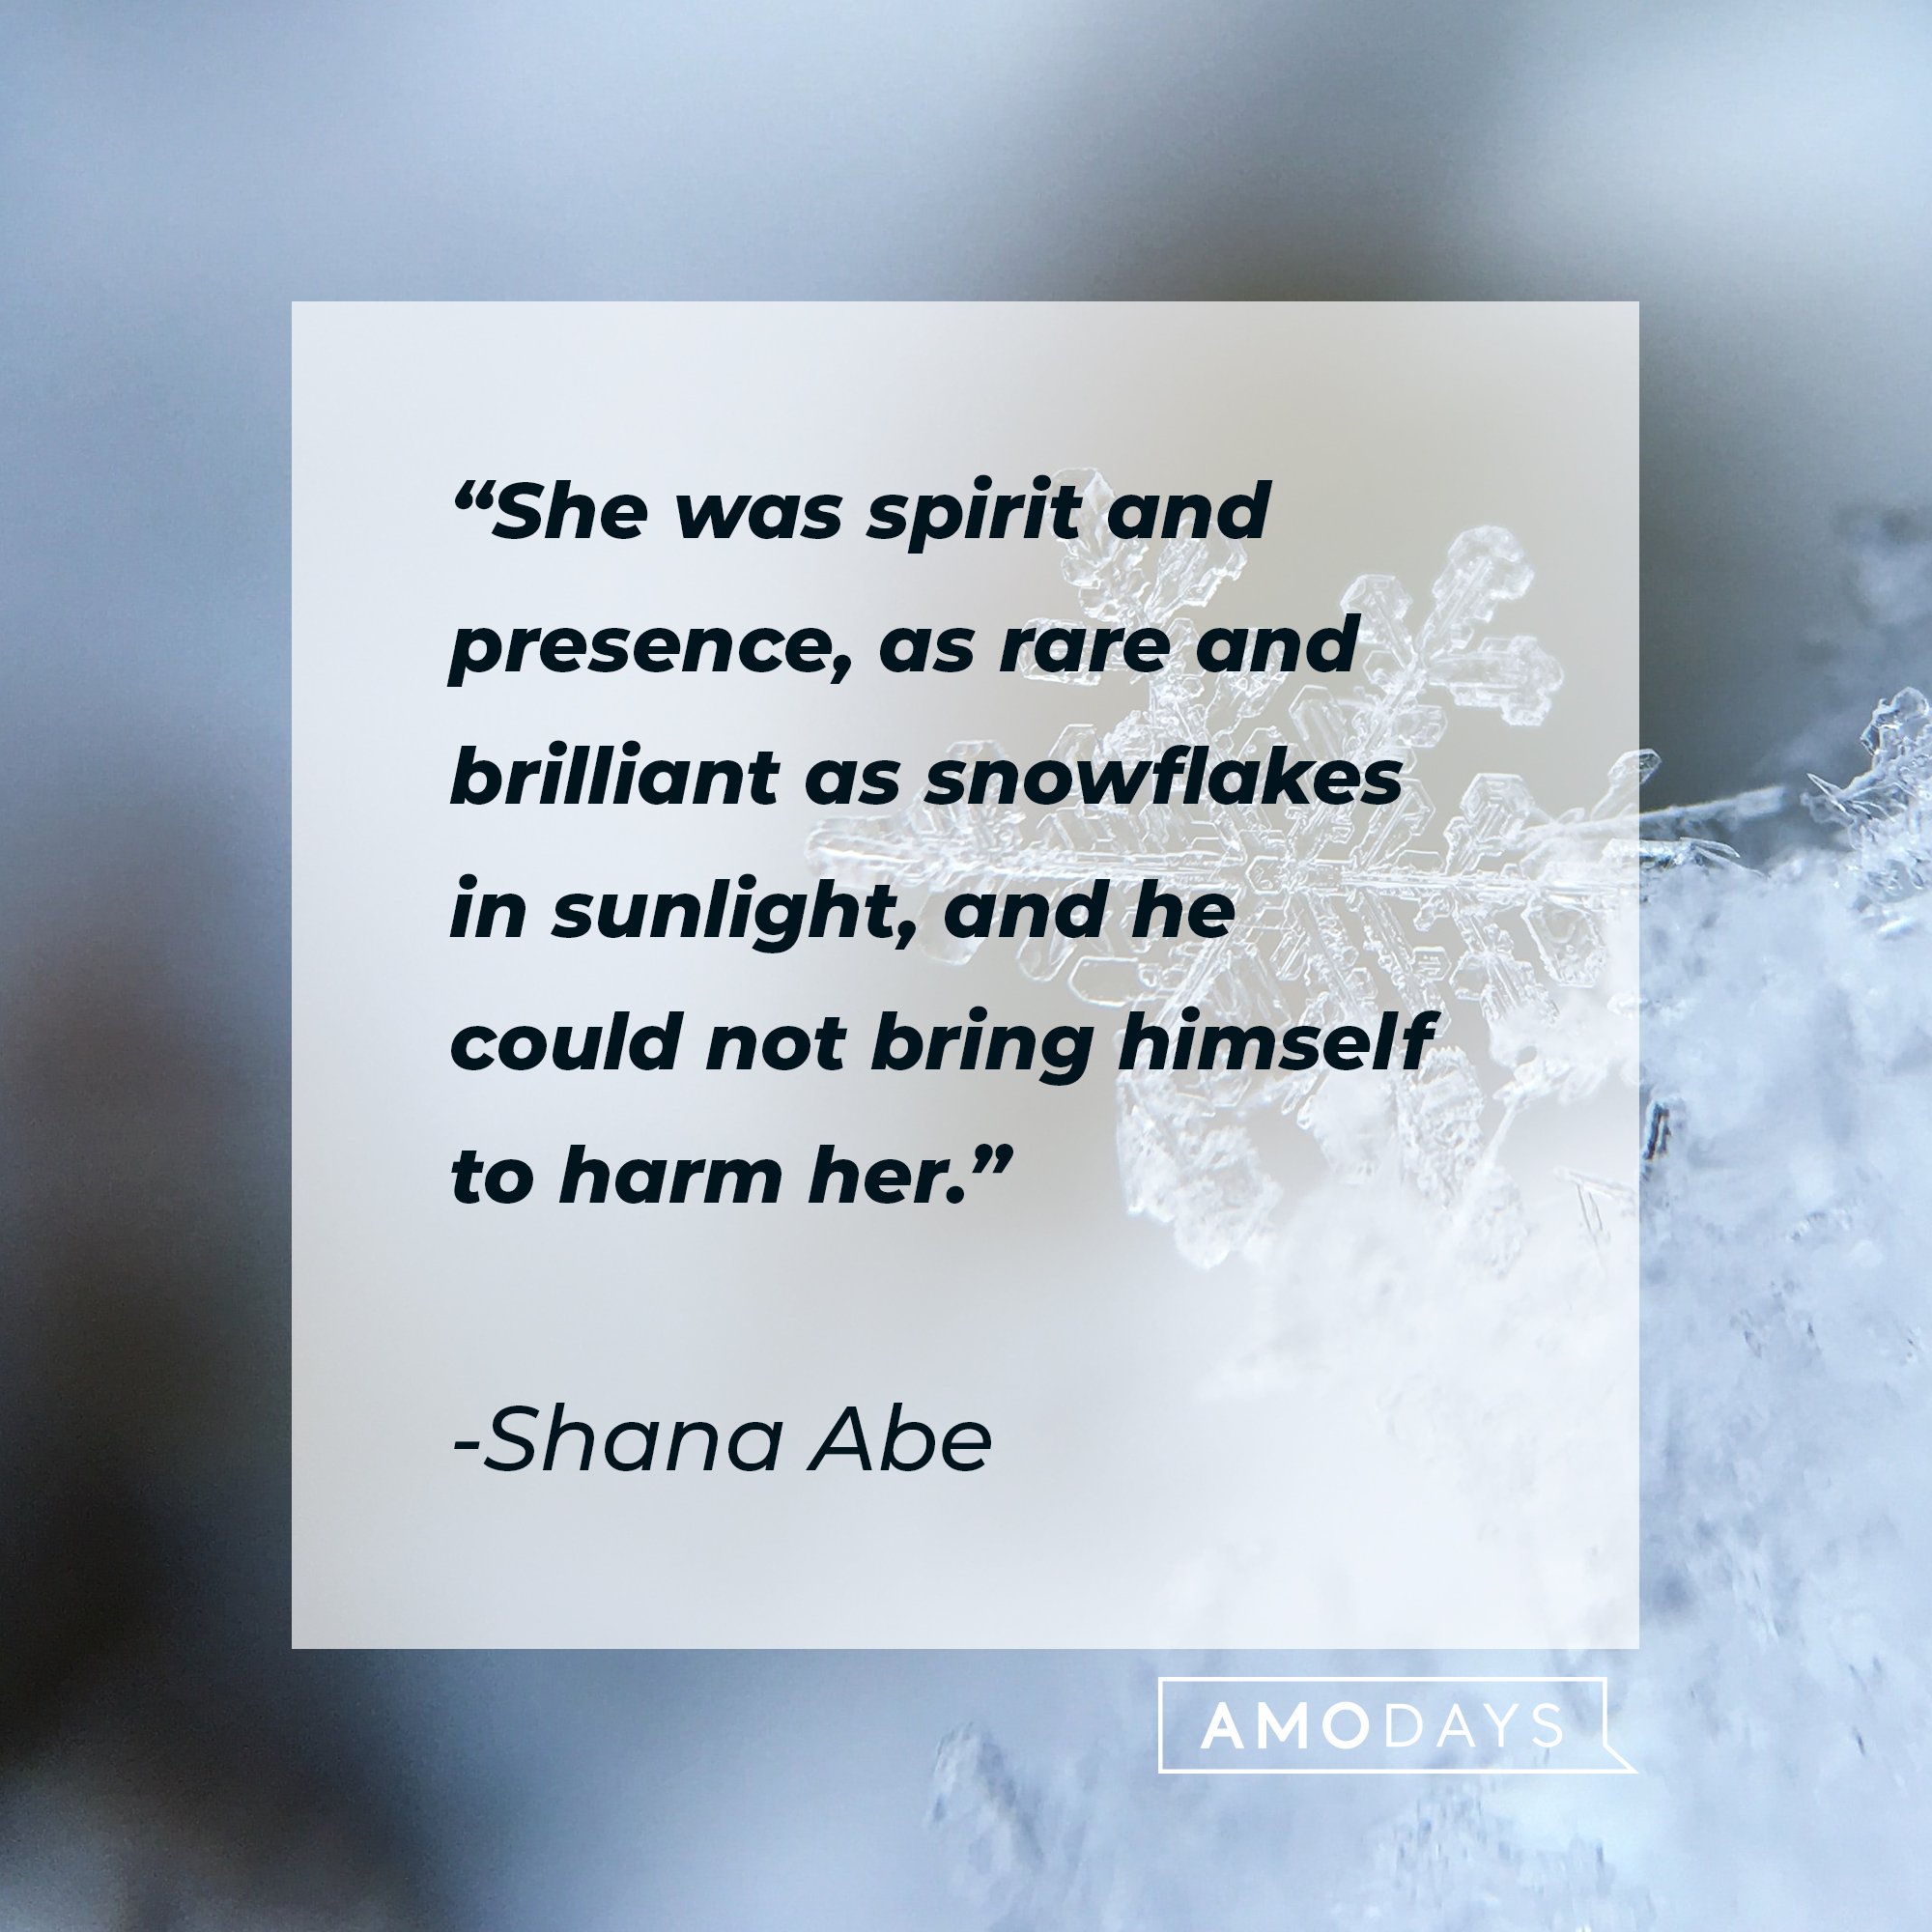 Shana Abe’s quote: "She was spirit and presence, as rare and brilliant as snowflakes in sunlight, and he could not bring himself to harm her." | Image: AmoDays